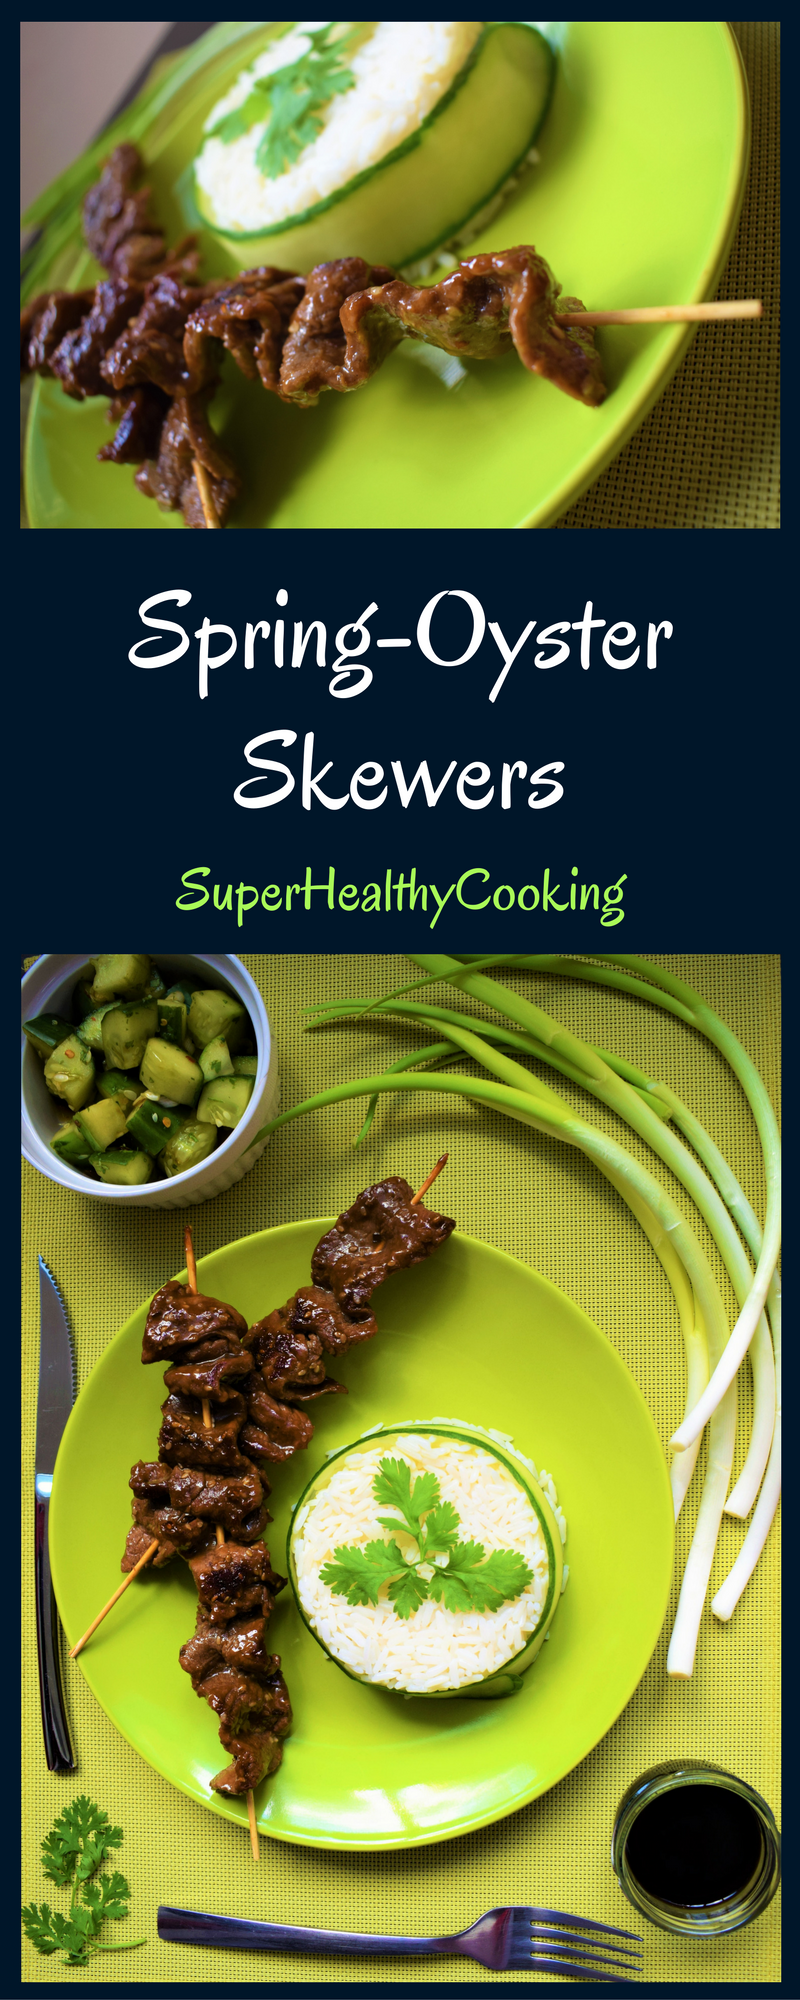 Spring-Oyster Beef Skewers - Cucumber Salad - Healthy Meat Dish - Beef - Oyster - Quick - Diet - Nutrition - Cooking - Food - Healthy - Recipe - Low calorie-carb-fat - High Protein